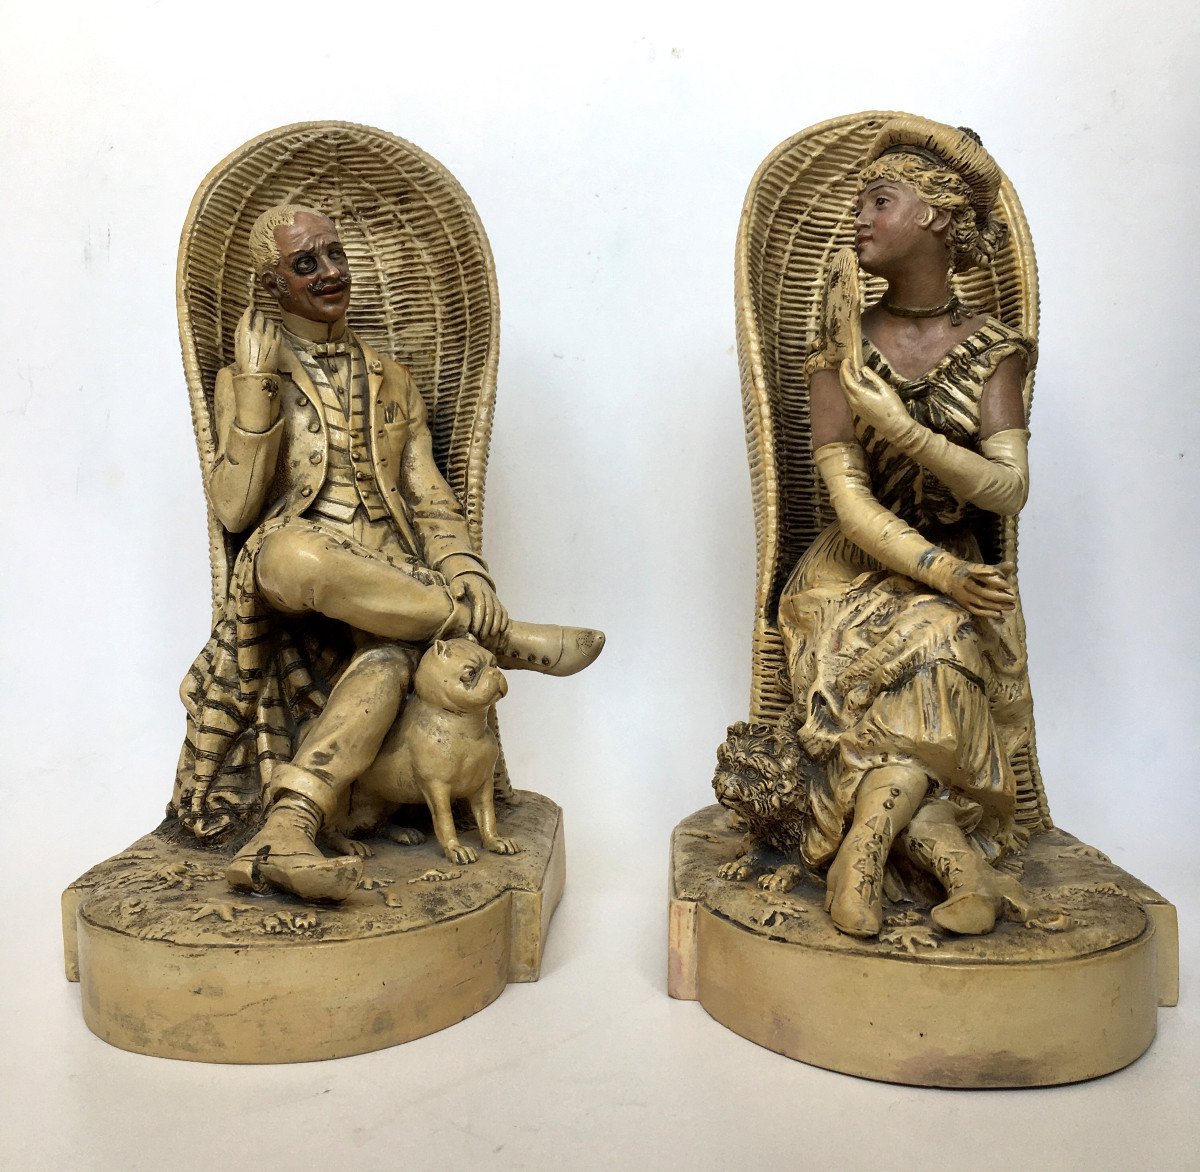 Pair Of Polychrome Terracotta. "elegant On The Beach At The End Of The 19th Century". Austria.